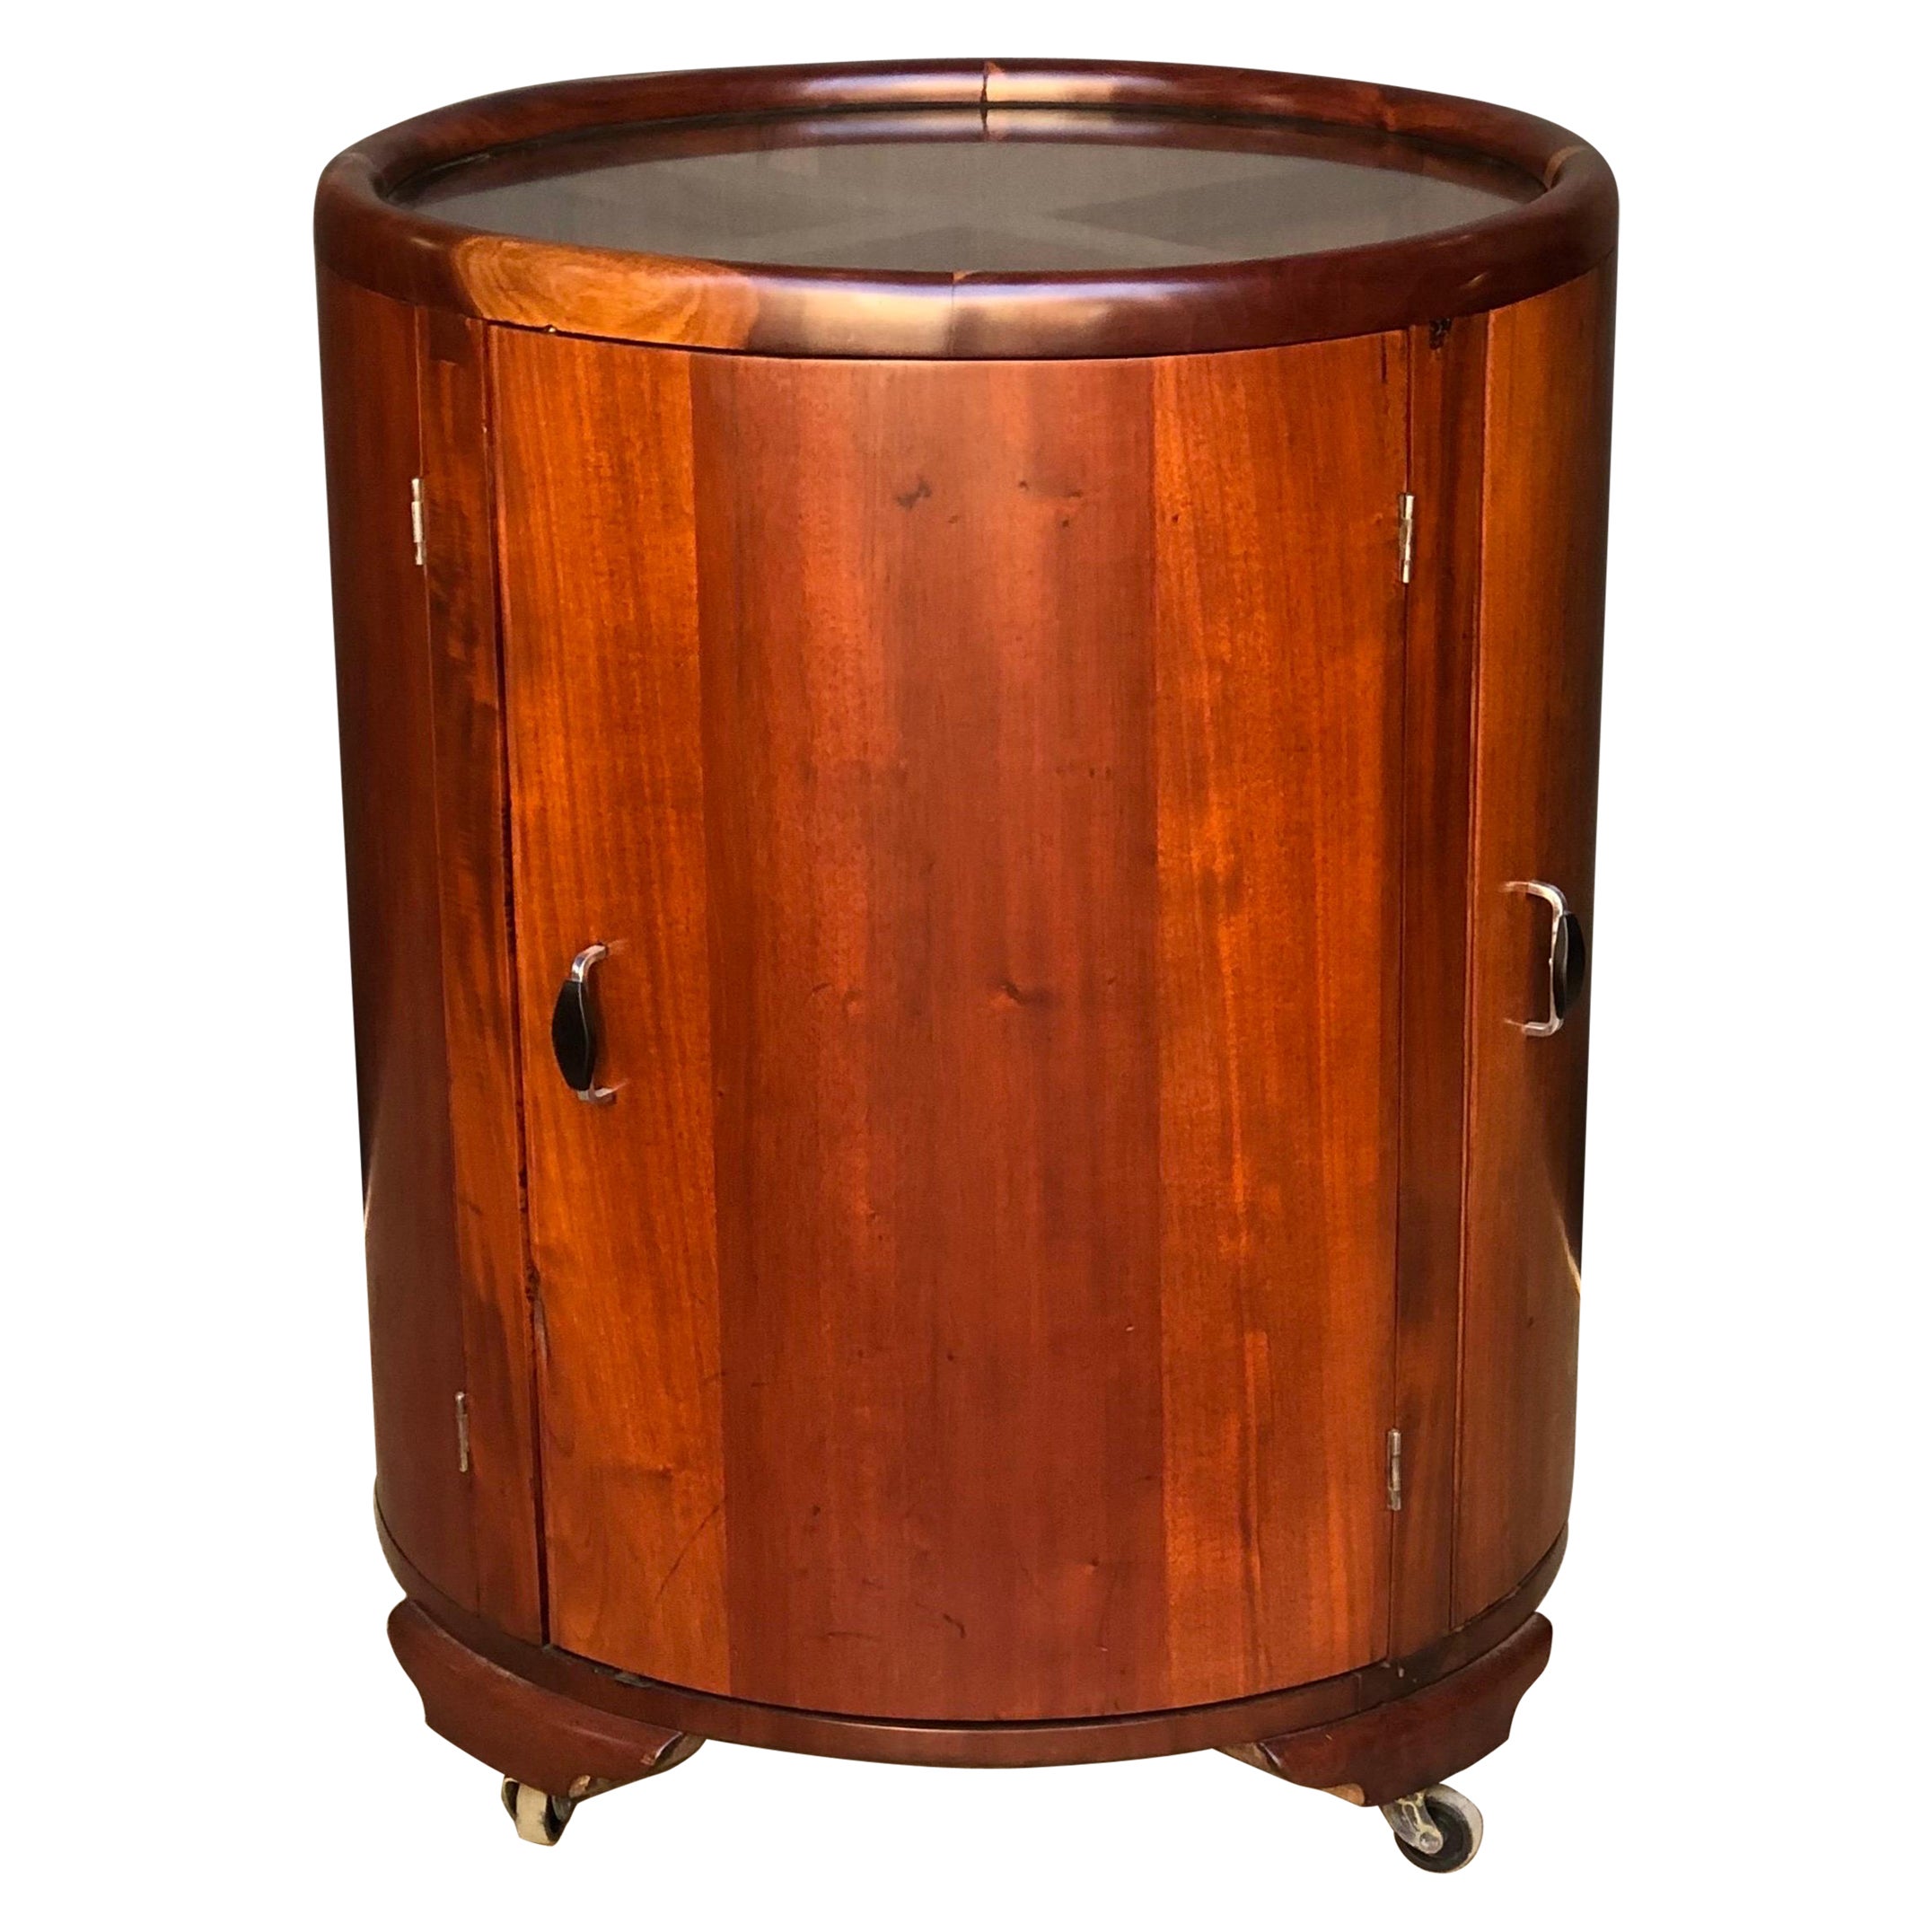 Jamaican Art Deco Round Bar/Cocktail Cabinet By Burnett Webster(circa.1934-1939) For Sale